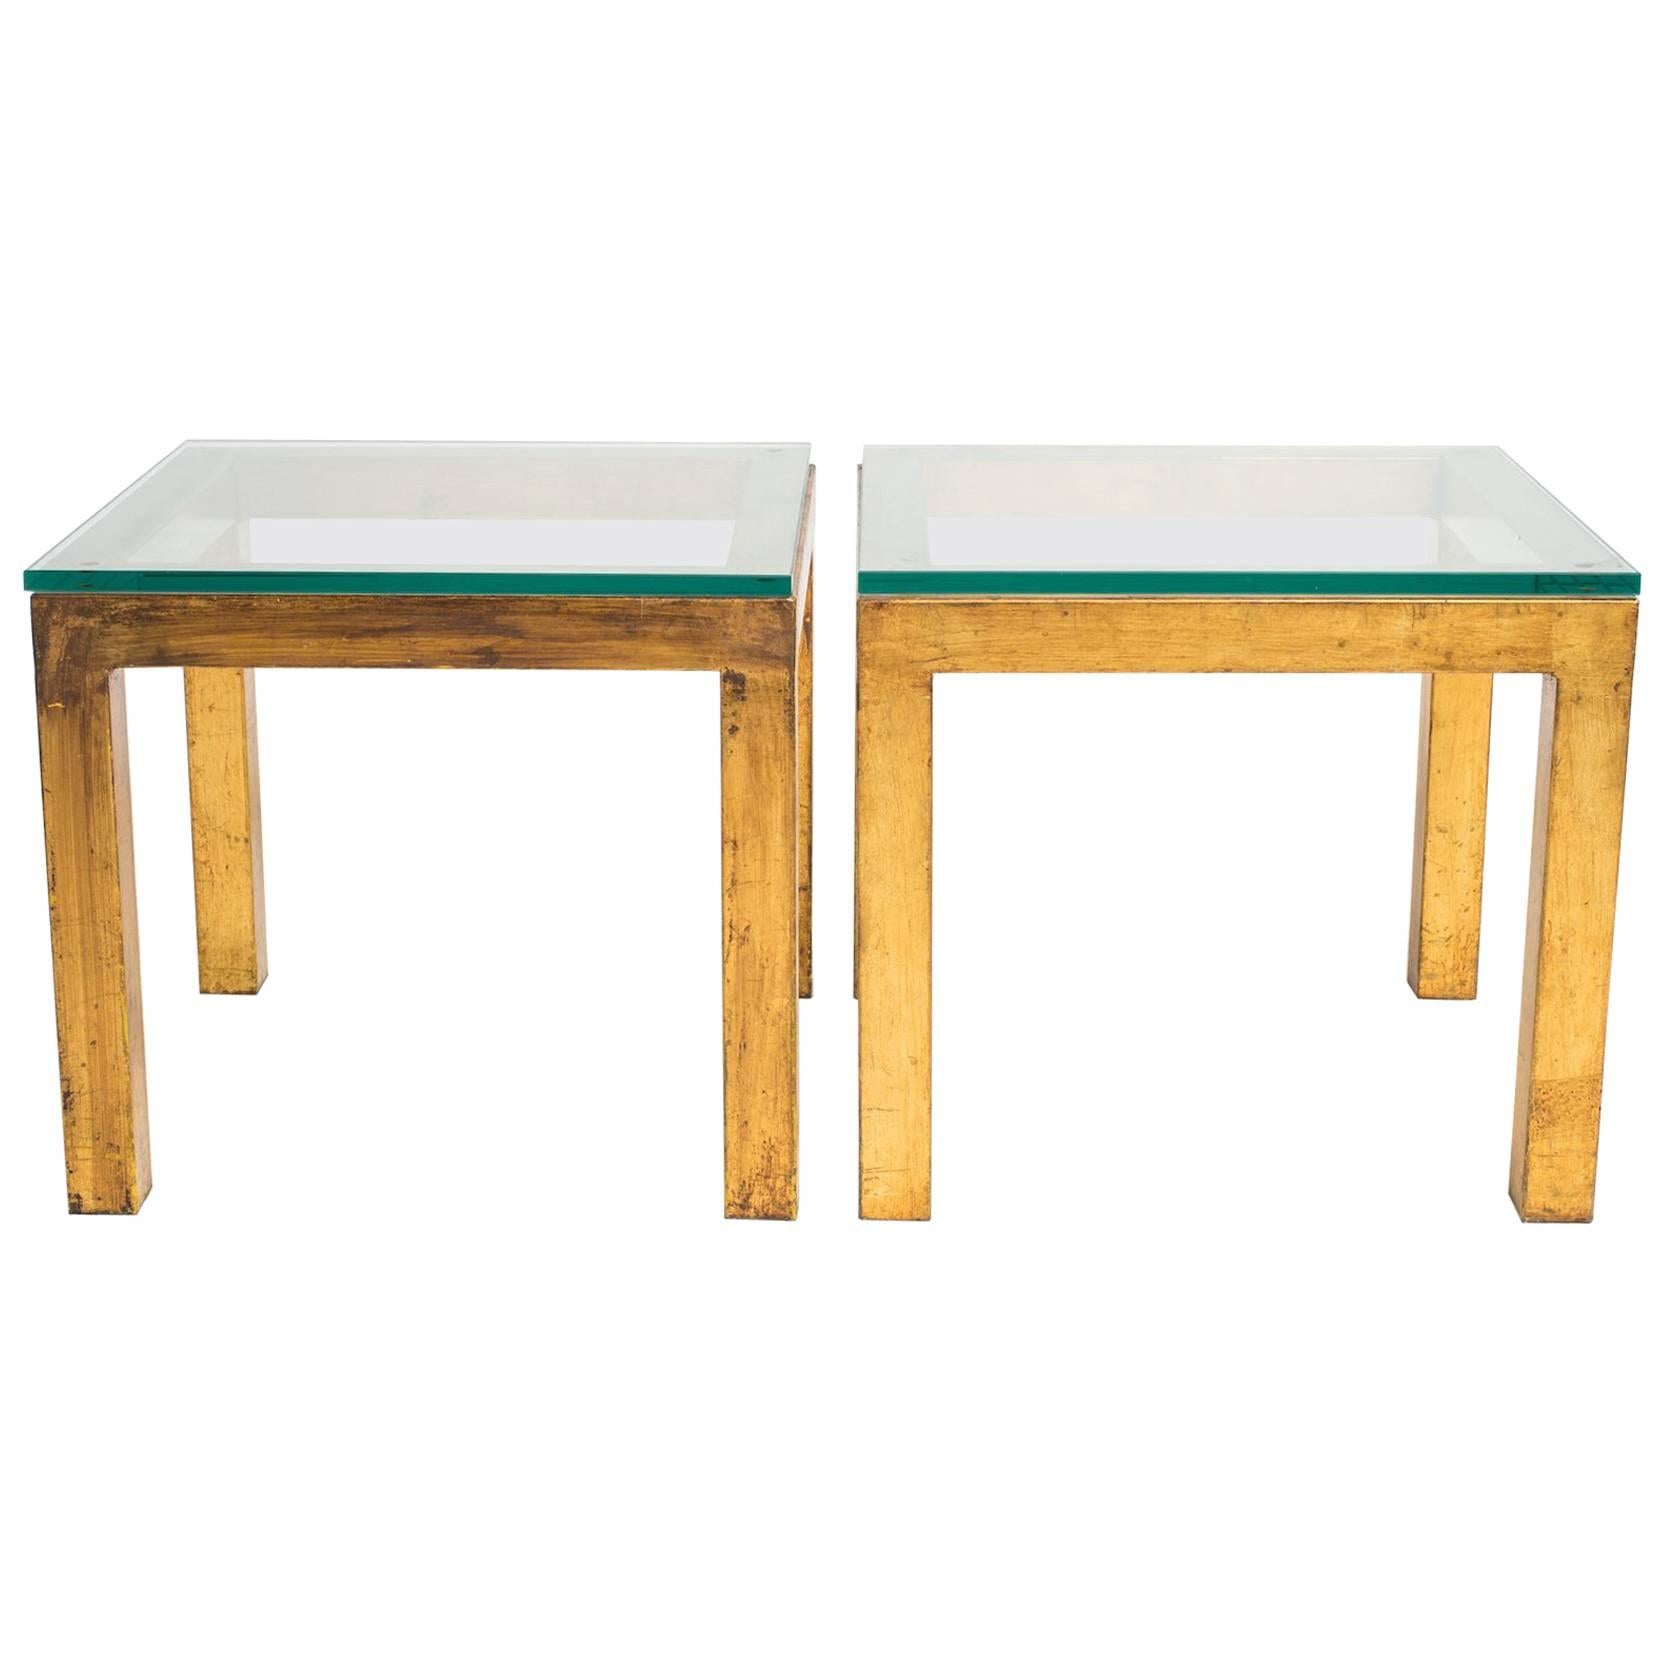 Pair of Gilt Metal Parsons Side Tables with Thick Glass Tops